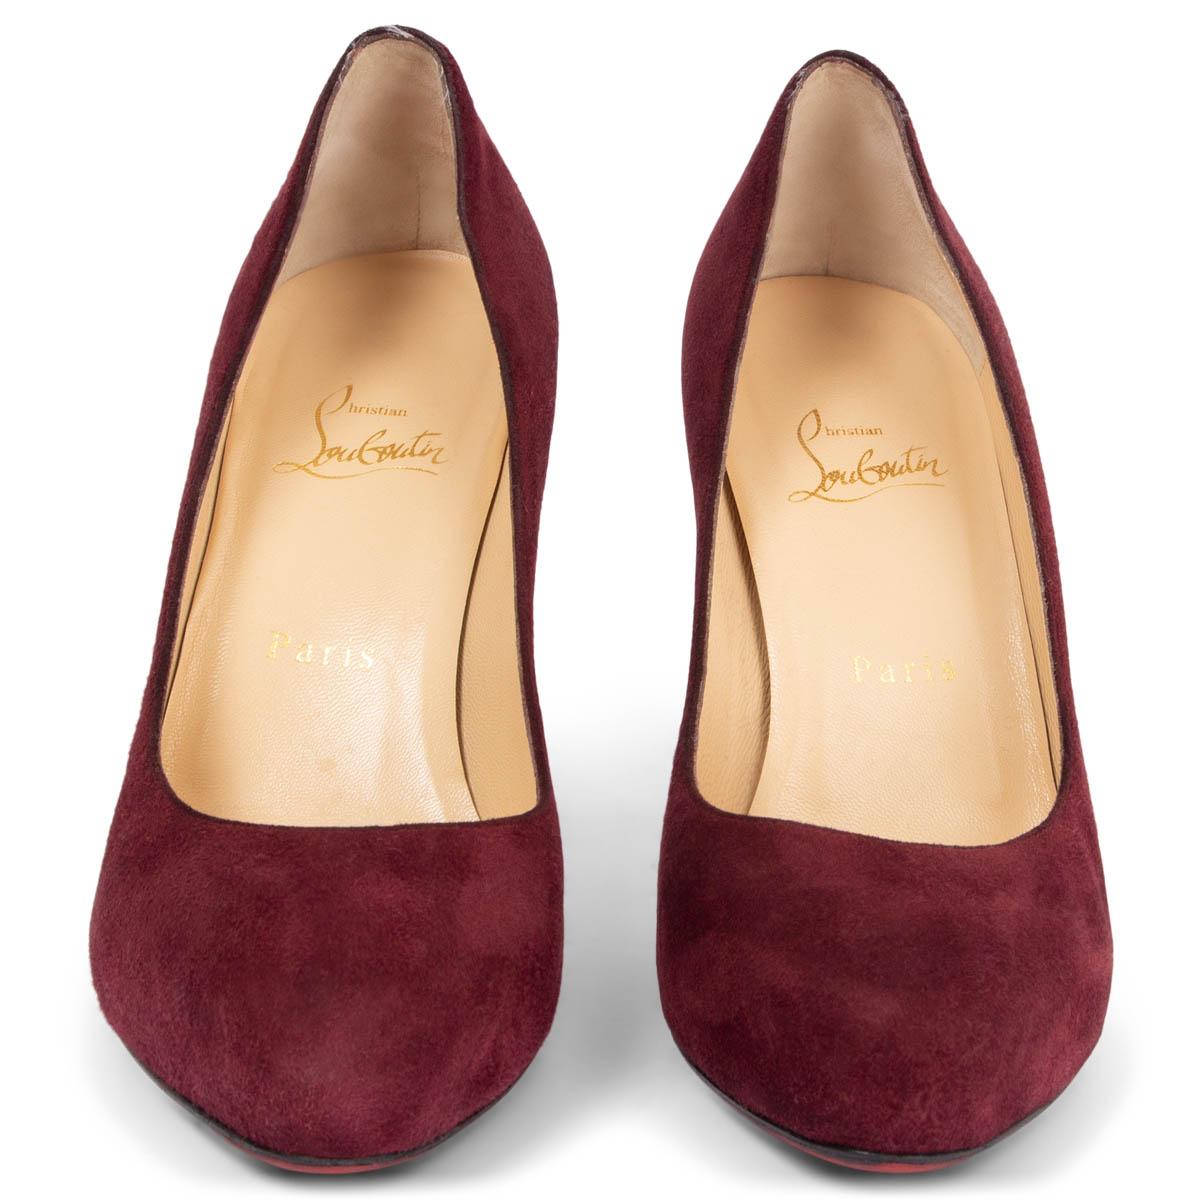 100% authentic Christian Louboutin Simple 100 pumps in burgundy suede leather. The design features a hidden platform. Have been worn and show some soft wear to the left heel. Overall in excellent condition. Red rubber sole got added. Come with dust